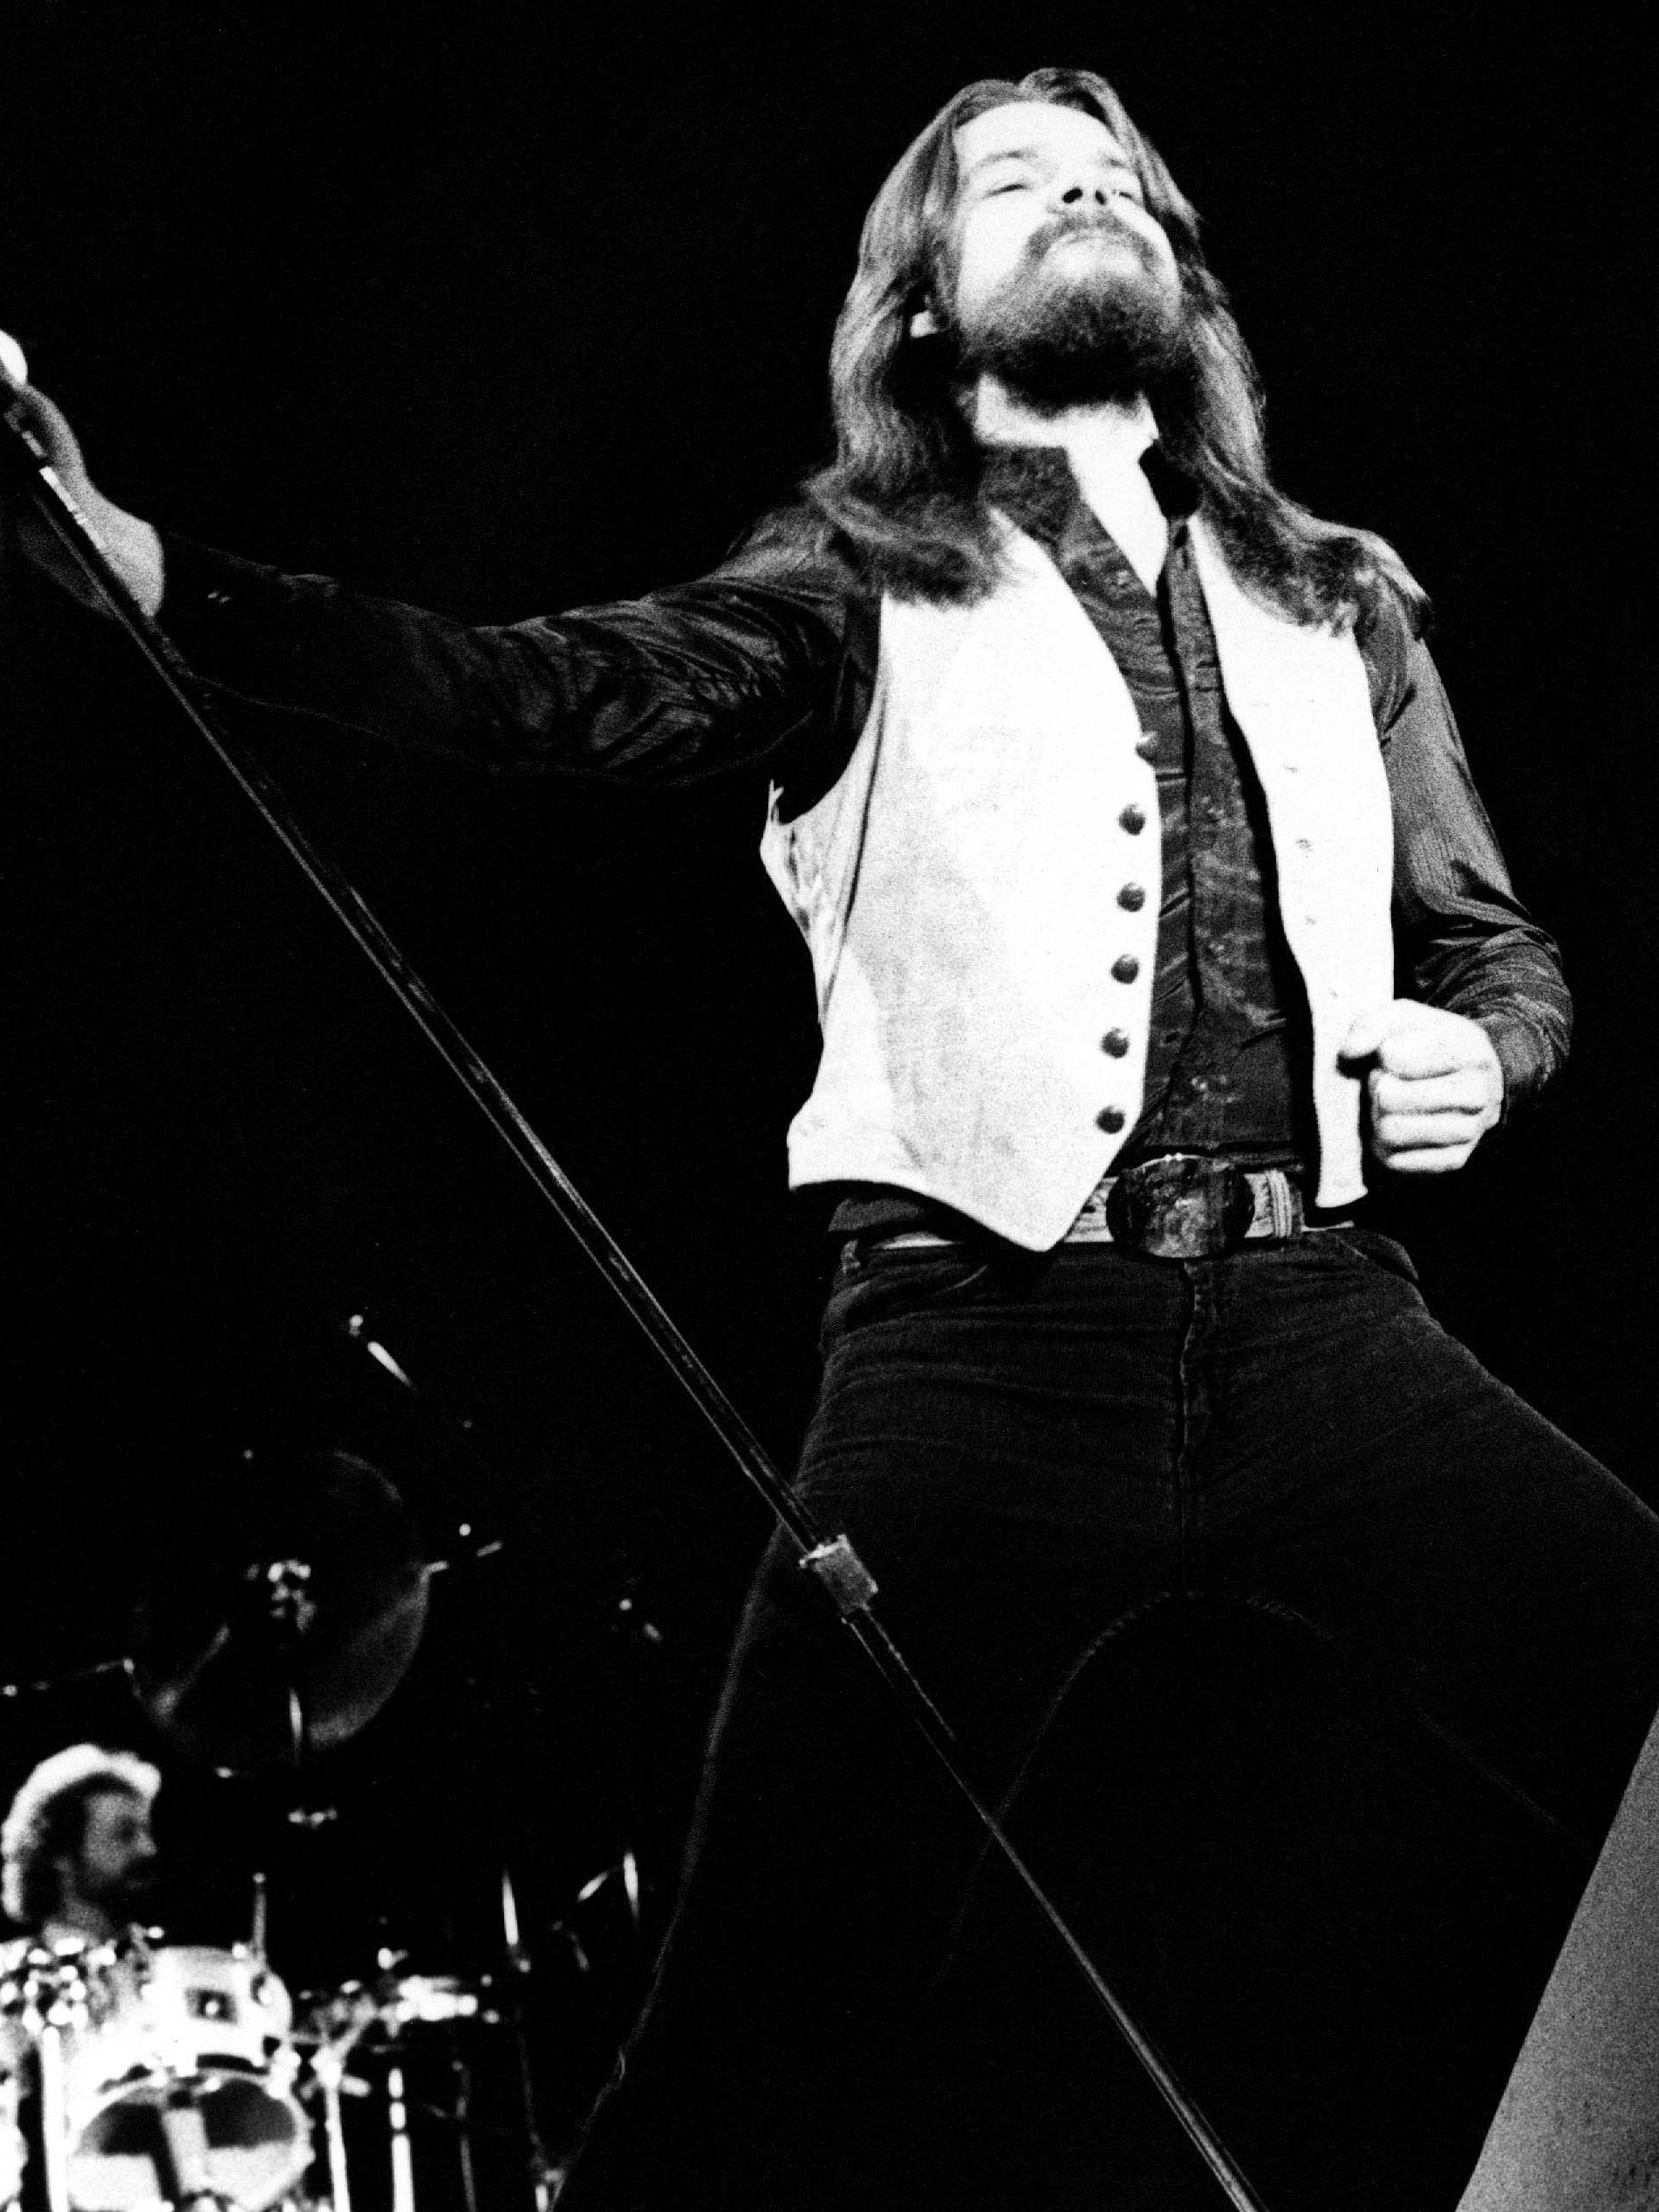 Bob Seger performed two shows in September 1975 at Cobo Center that were recorded for the album "Live Bullet."